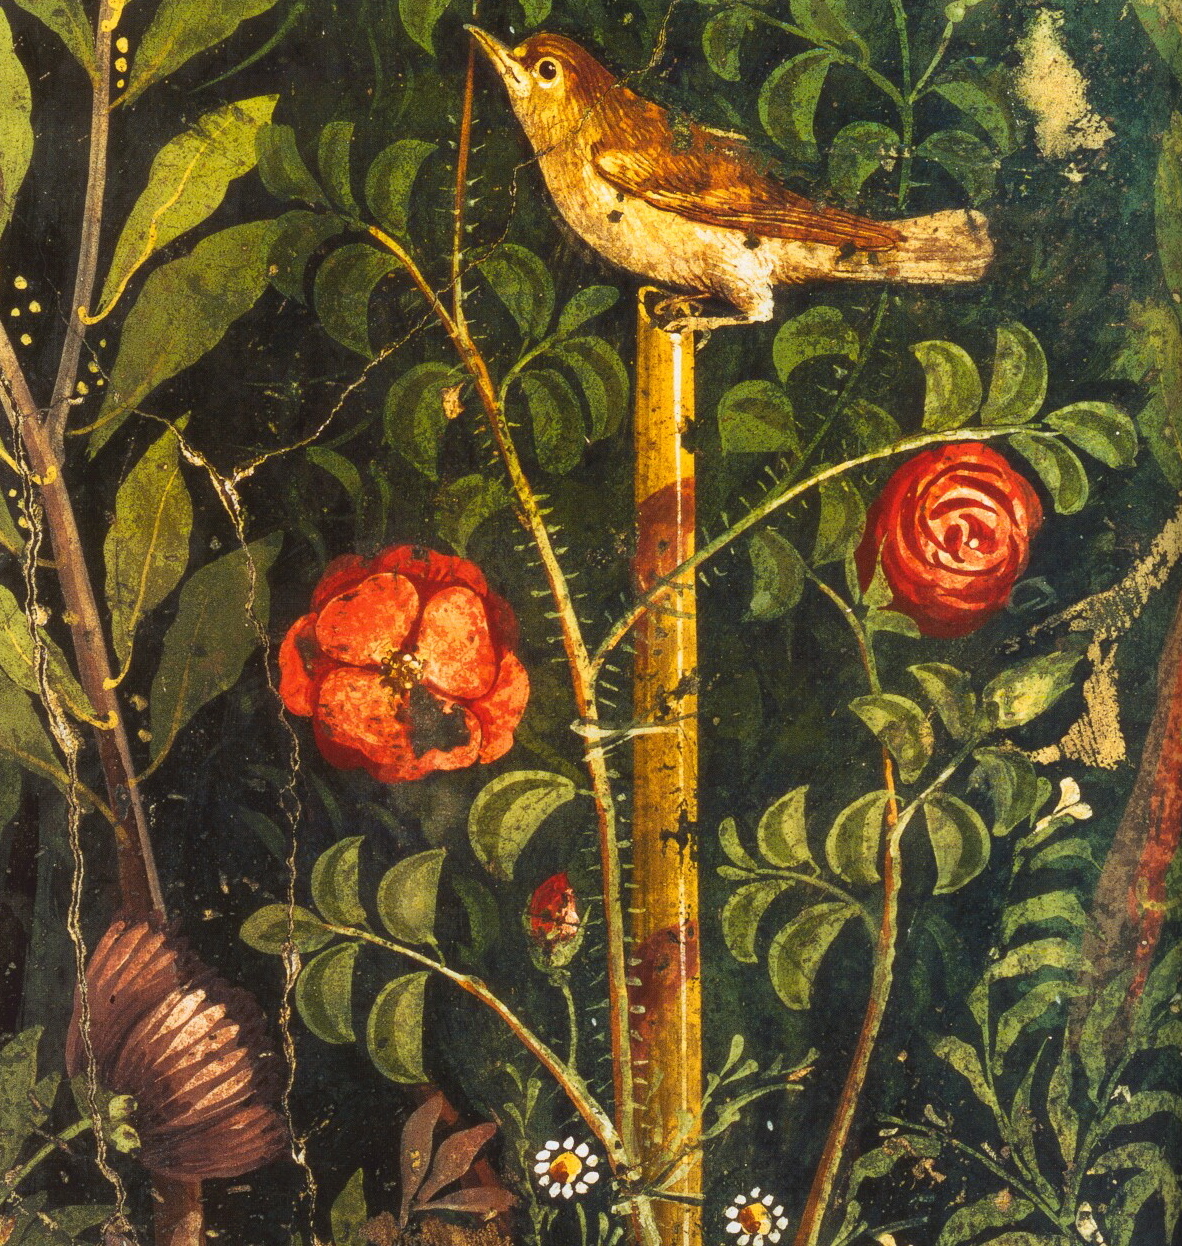 Old Paintings of Birds - Roman garden painting, detail, first century AD